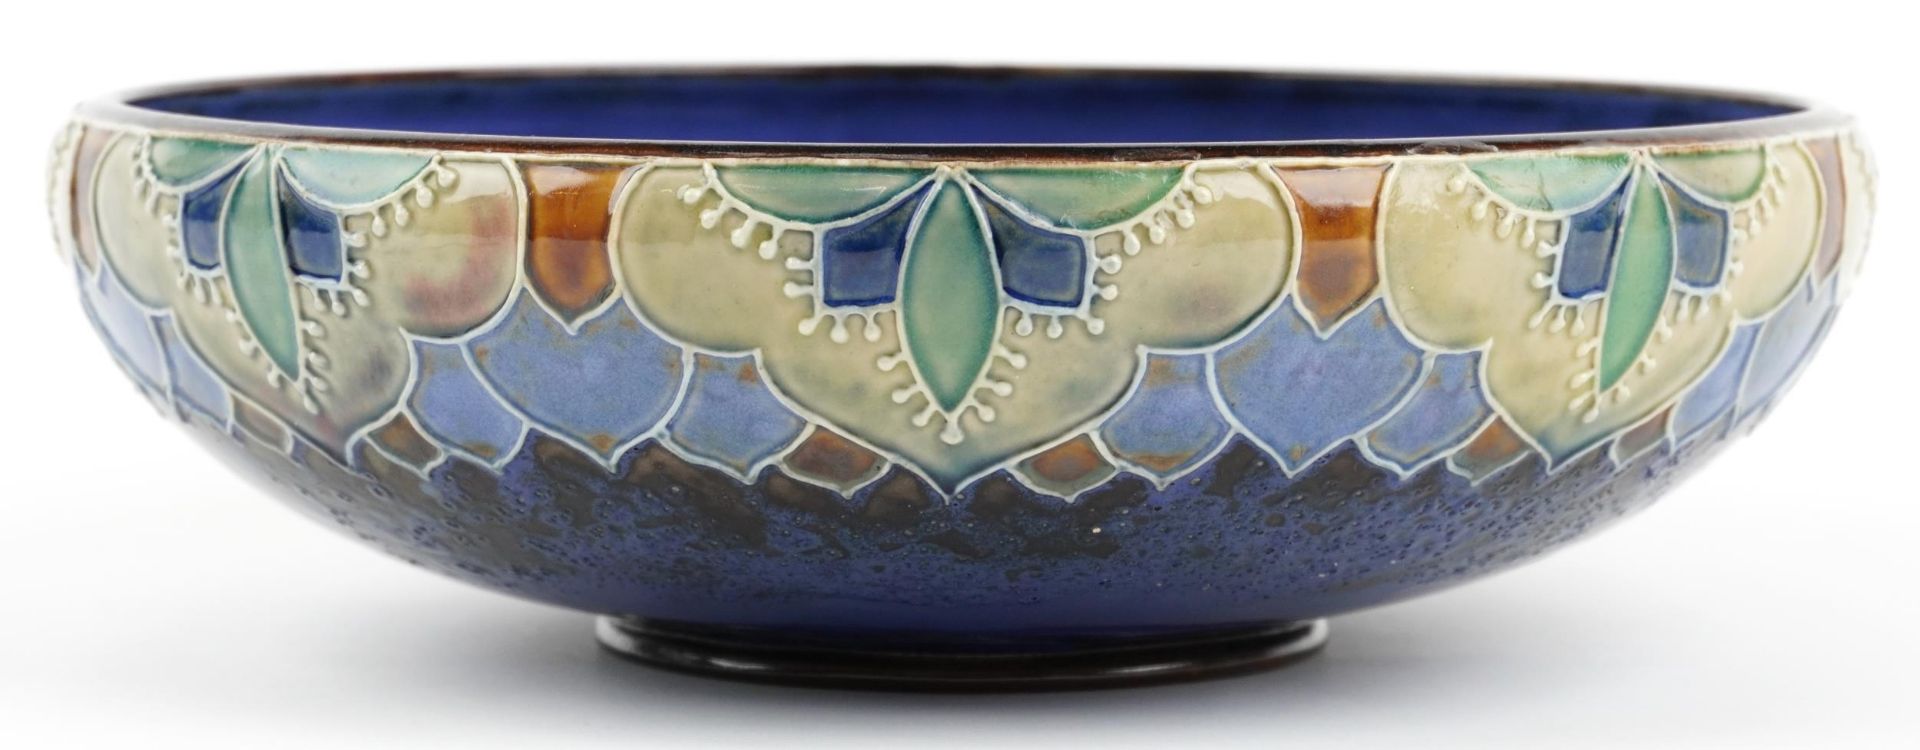 Royal Doulton, Art Nouveau stoneware bowl decorated in low relief with stylised flowers, impressed - Image 2 of 5